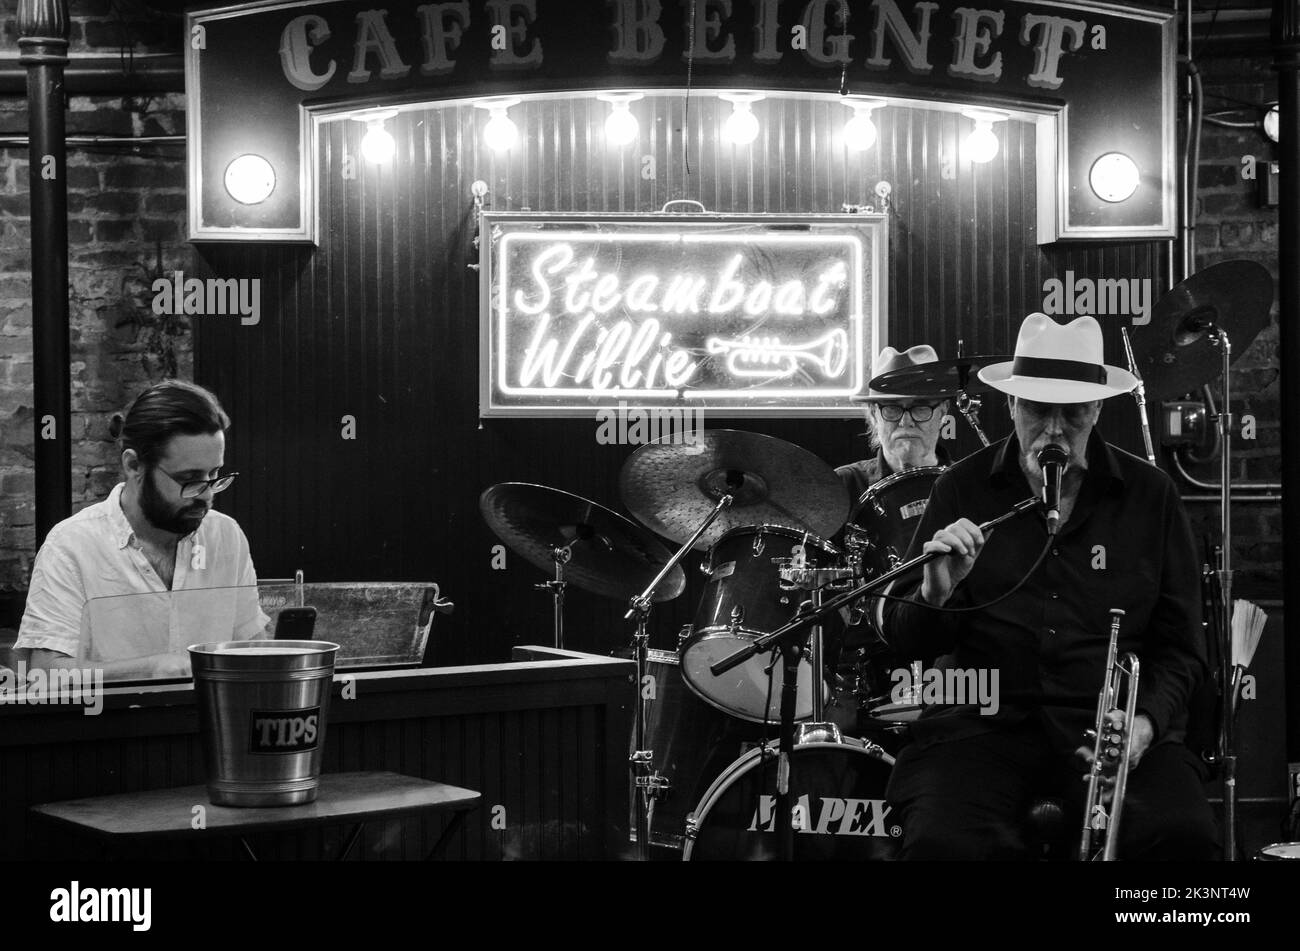 Live Jazz Band playing at Cafe Beignet in New Orleans, Louisiana, USA Stock Photo